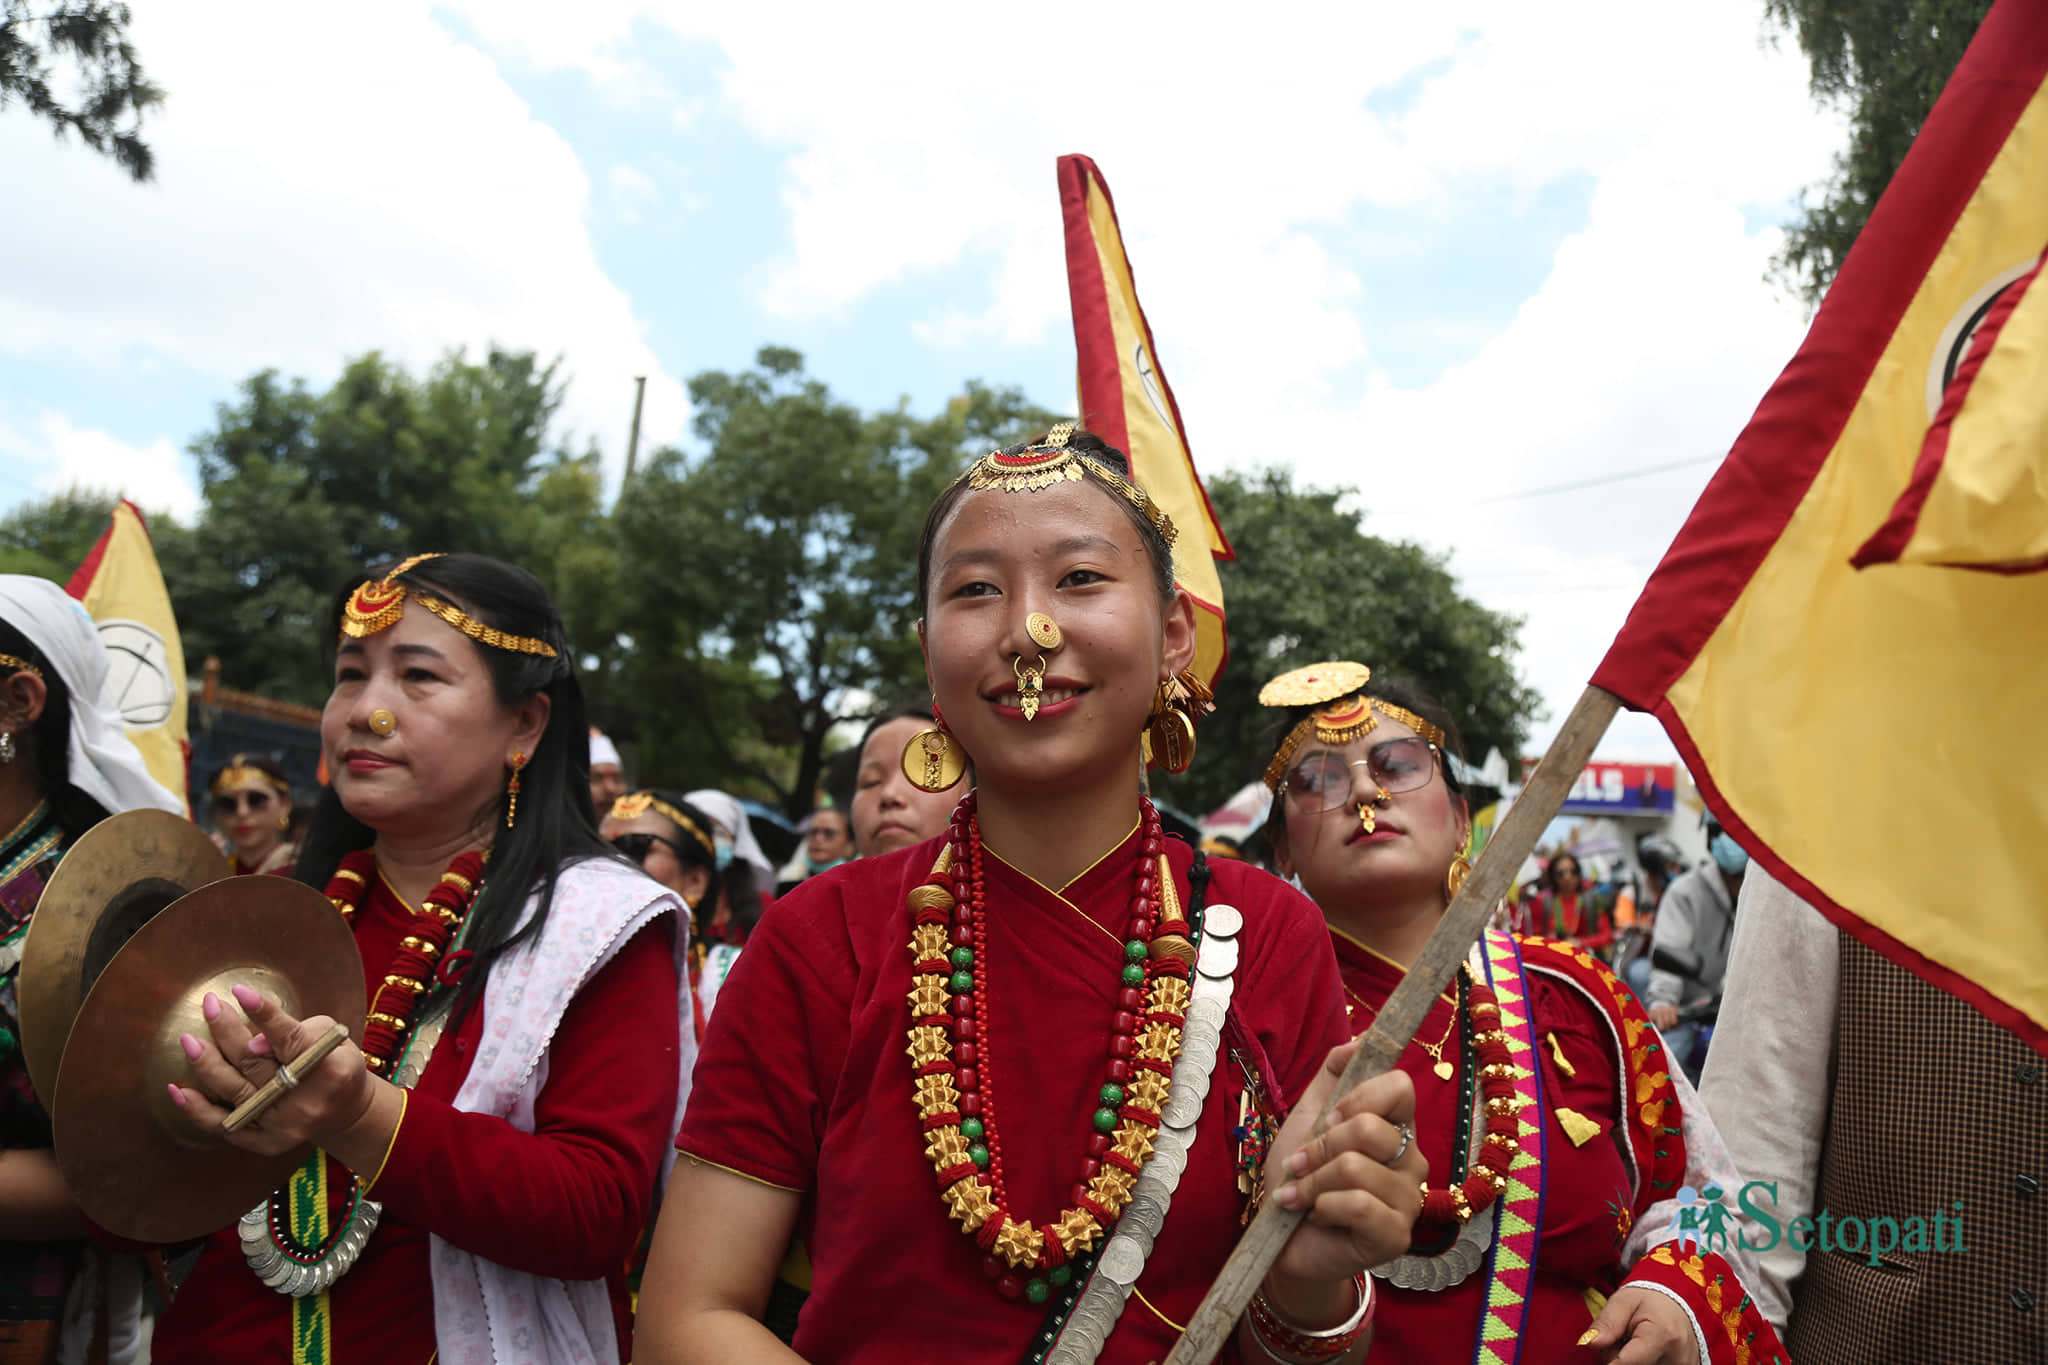 Indigenous Peoples' Day marked in Kathmandu (Pictures)